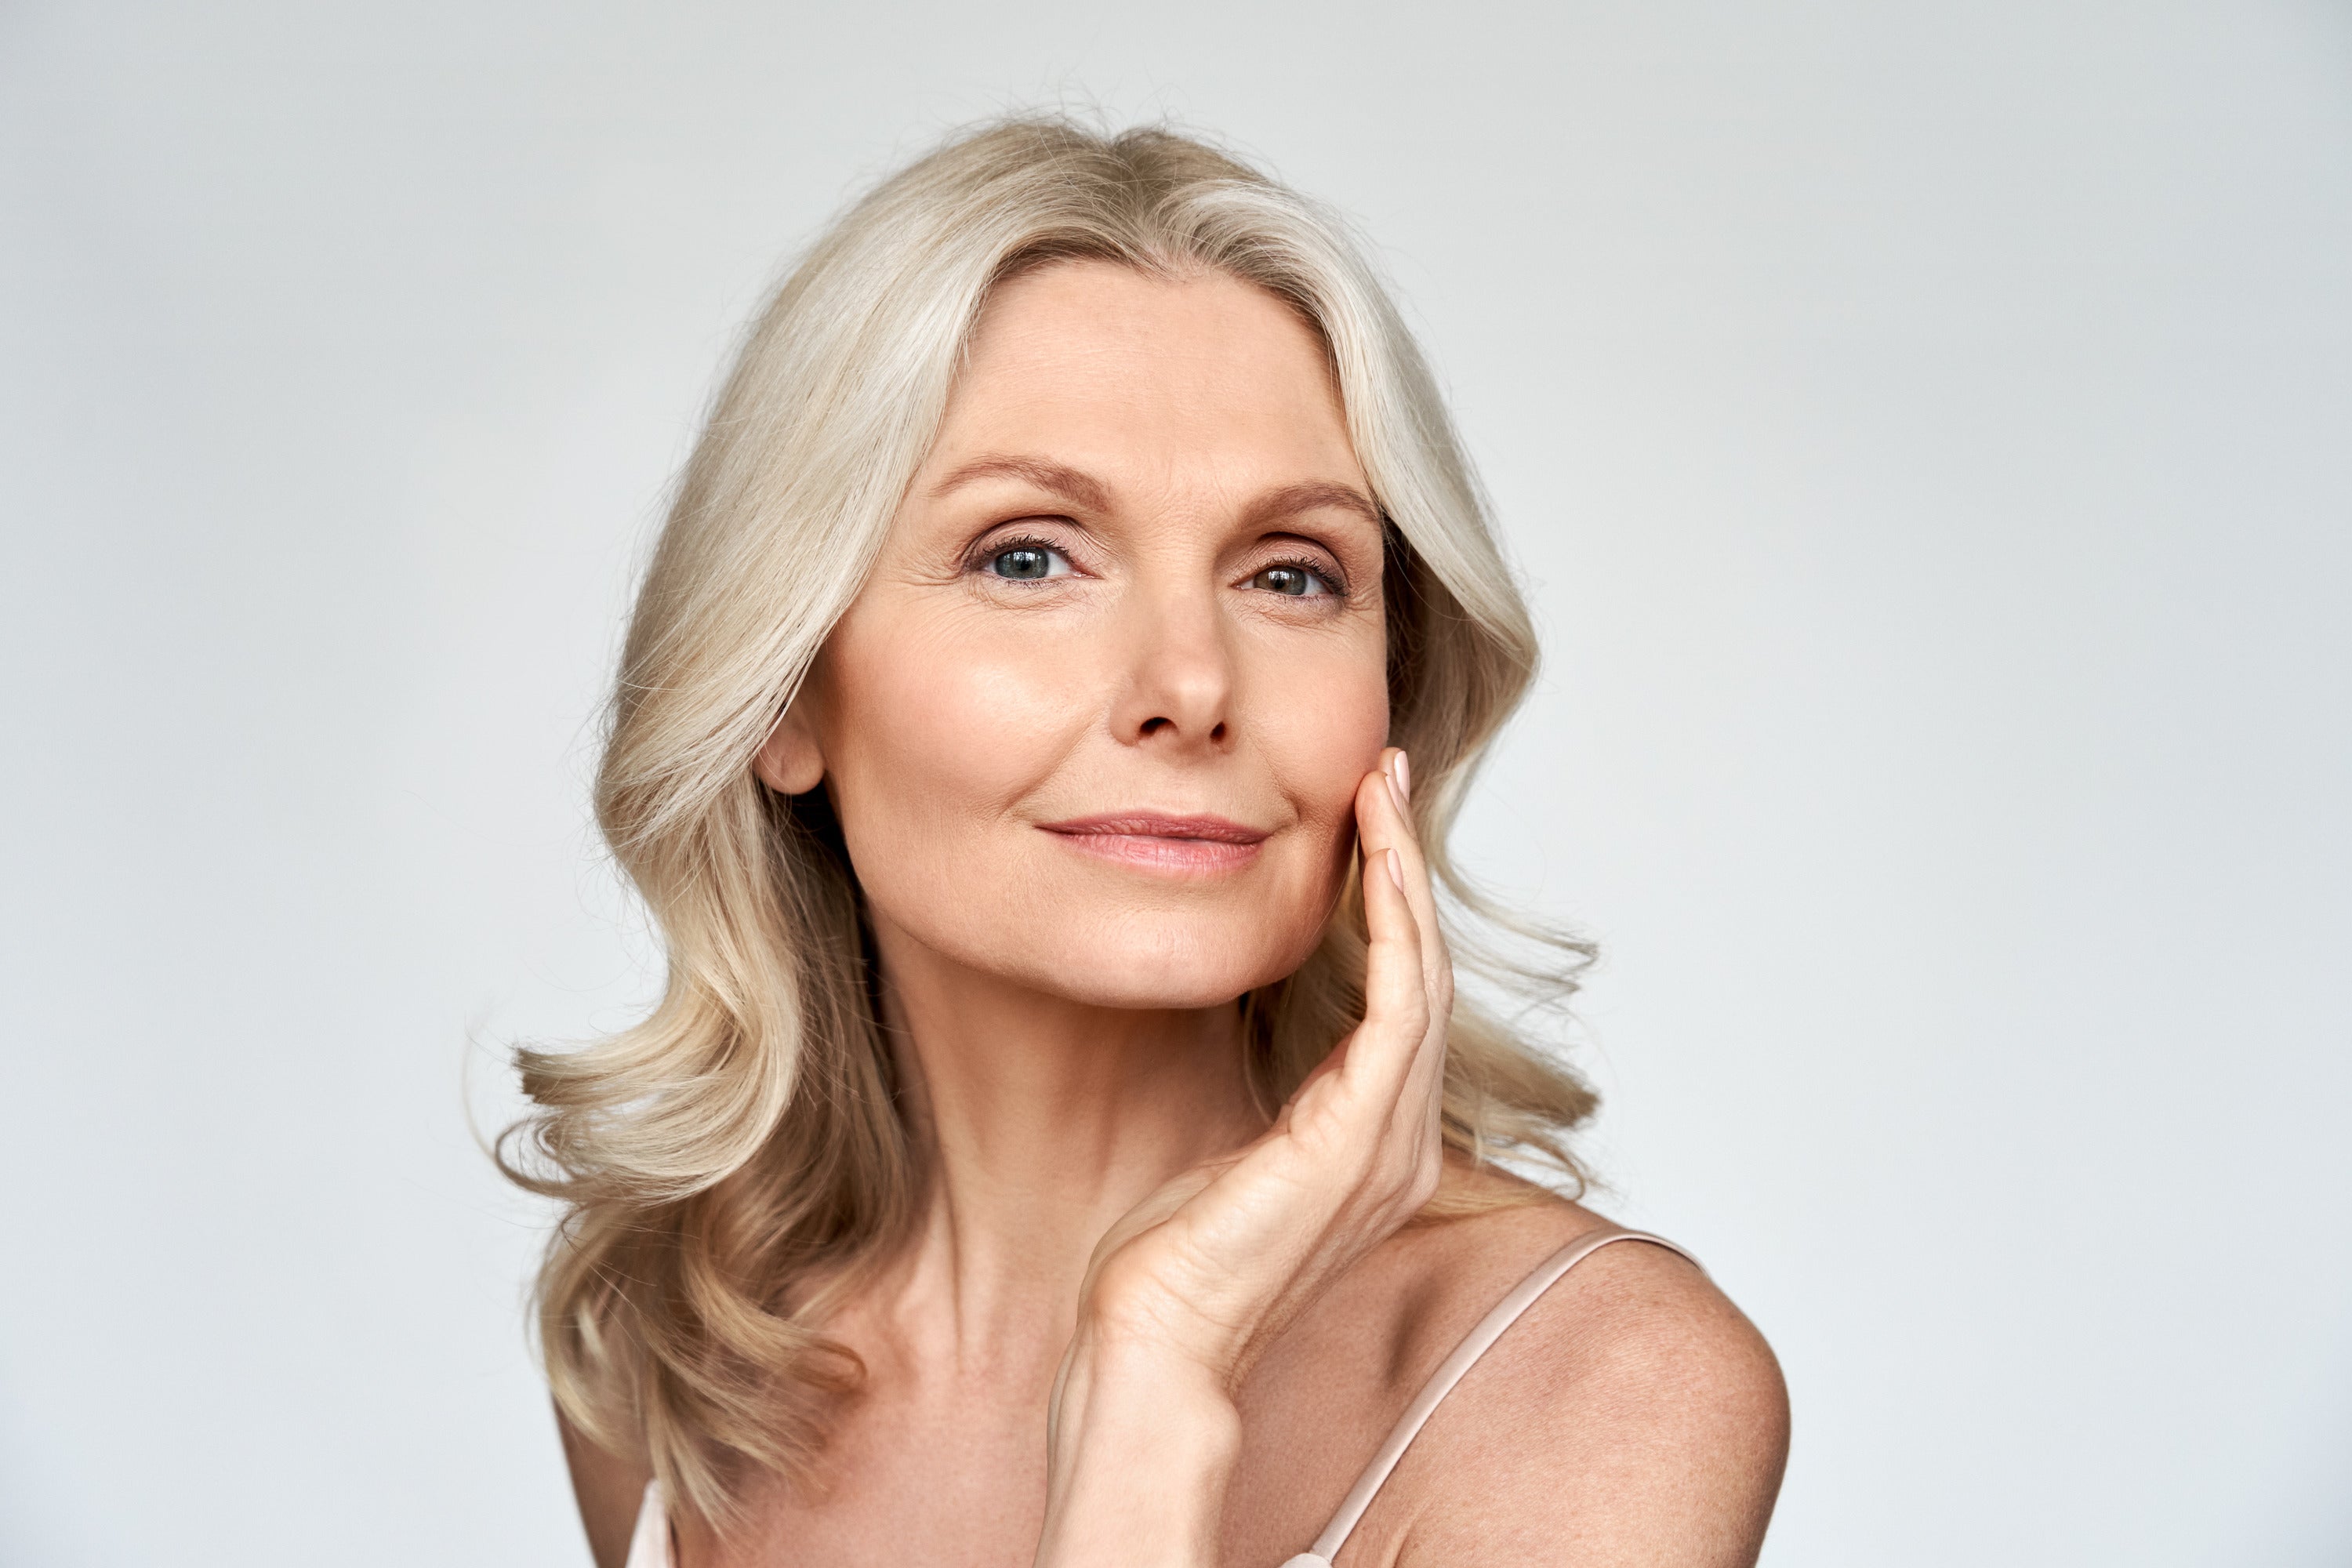 The 4 positive effects of Botox long term